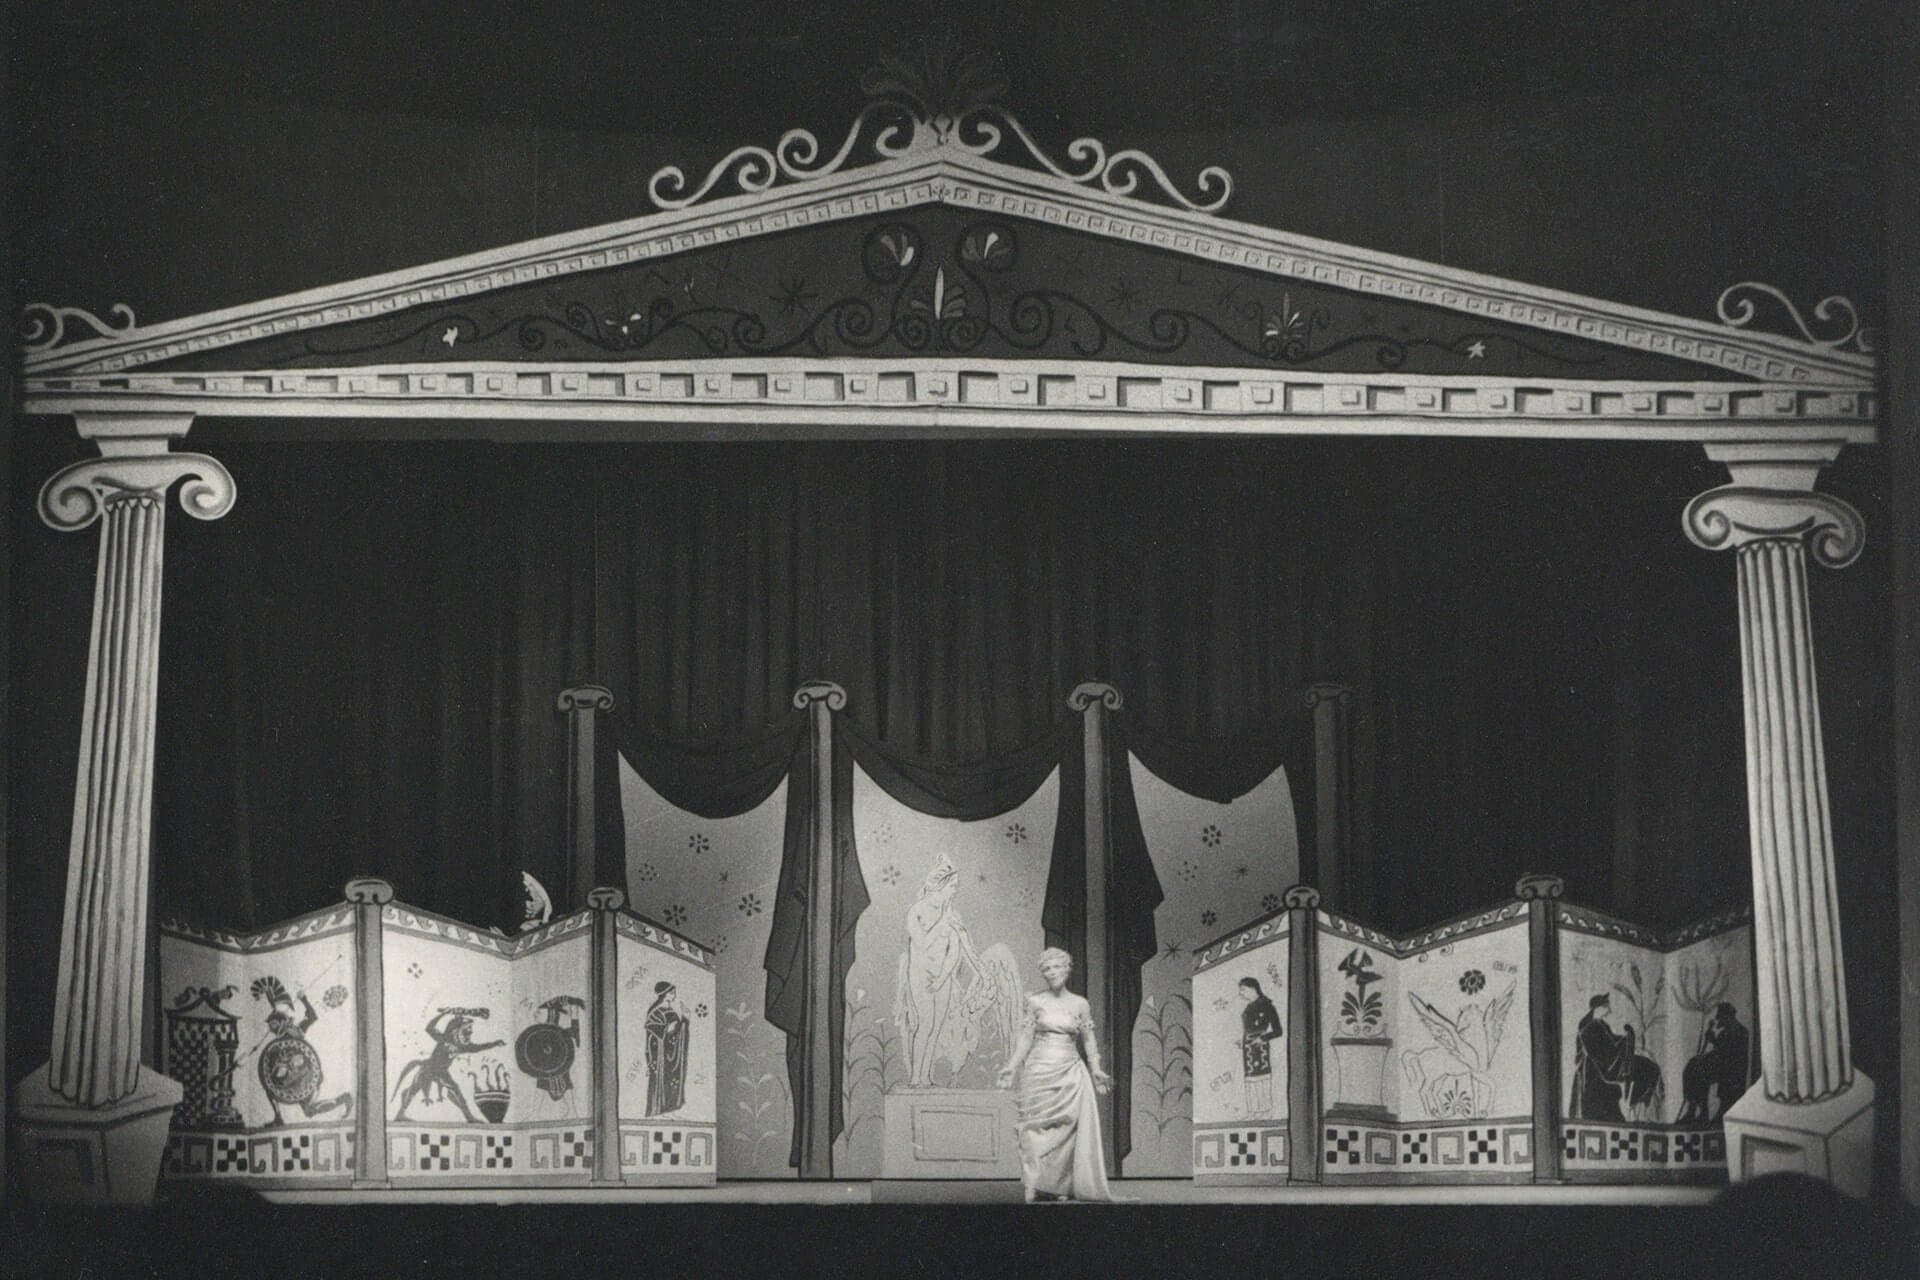 Archive material from the Greek National Opera production of La belle Hélène by Jacques Offenbach. Conductor: Walter Pfeffer, stage direction: Frixos Theologides, set and costume design: Lisa Zaimi, Olympia Theatre, 1960/61